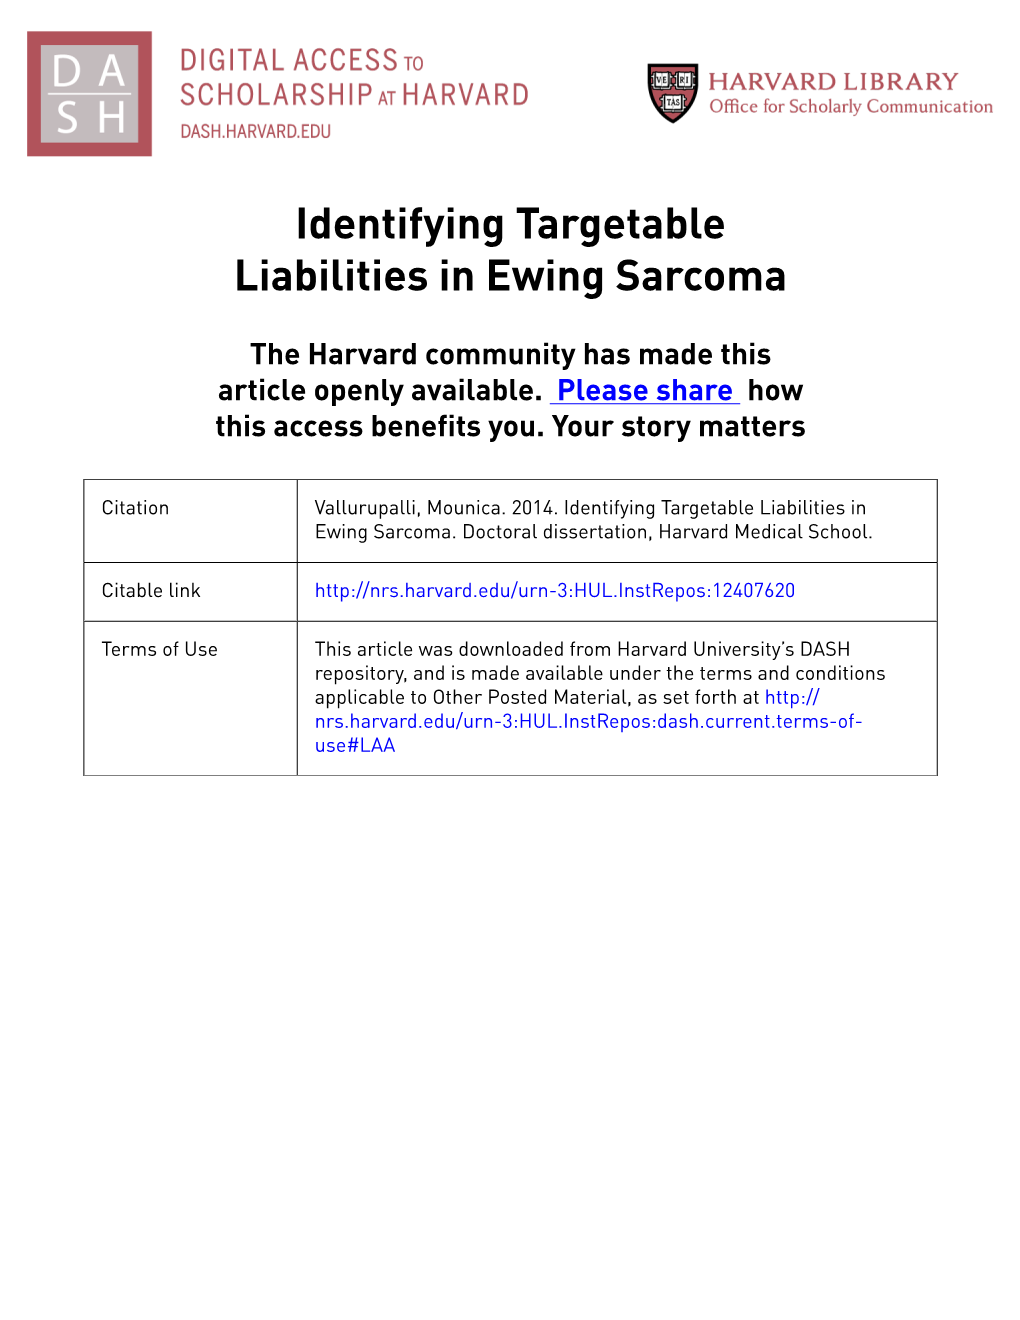 Identifying Targetable Liabilities in Ewing Sarcoma